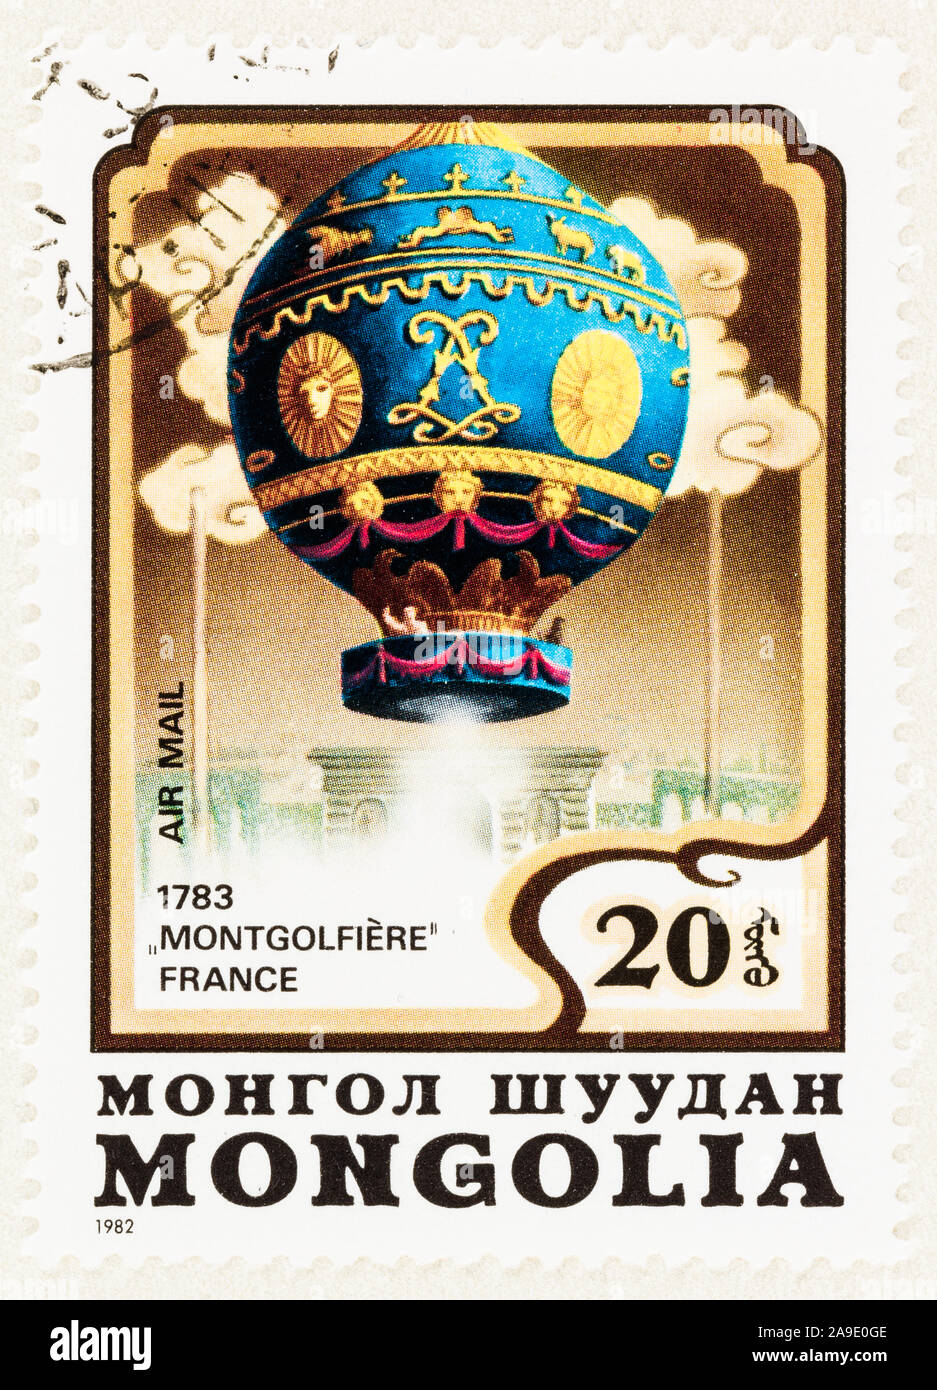 SEATTLE WASHINGTON - October 4, 2019: Postage stamp of Mongolia issued in 1982, featuring the first manned un-tethered hot air balloon flight of 1783. Stock Photo